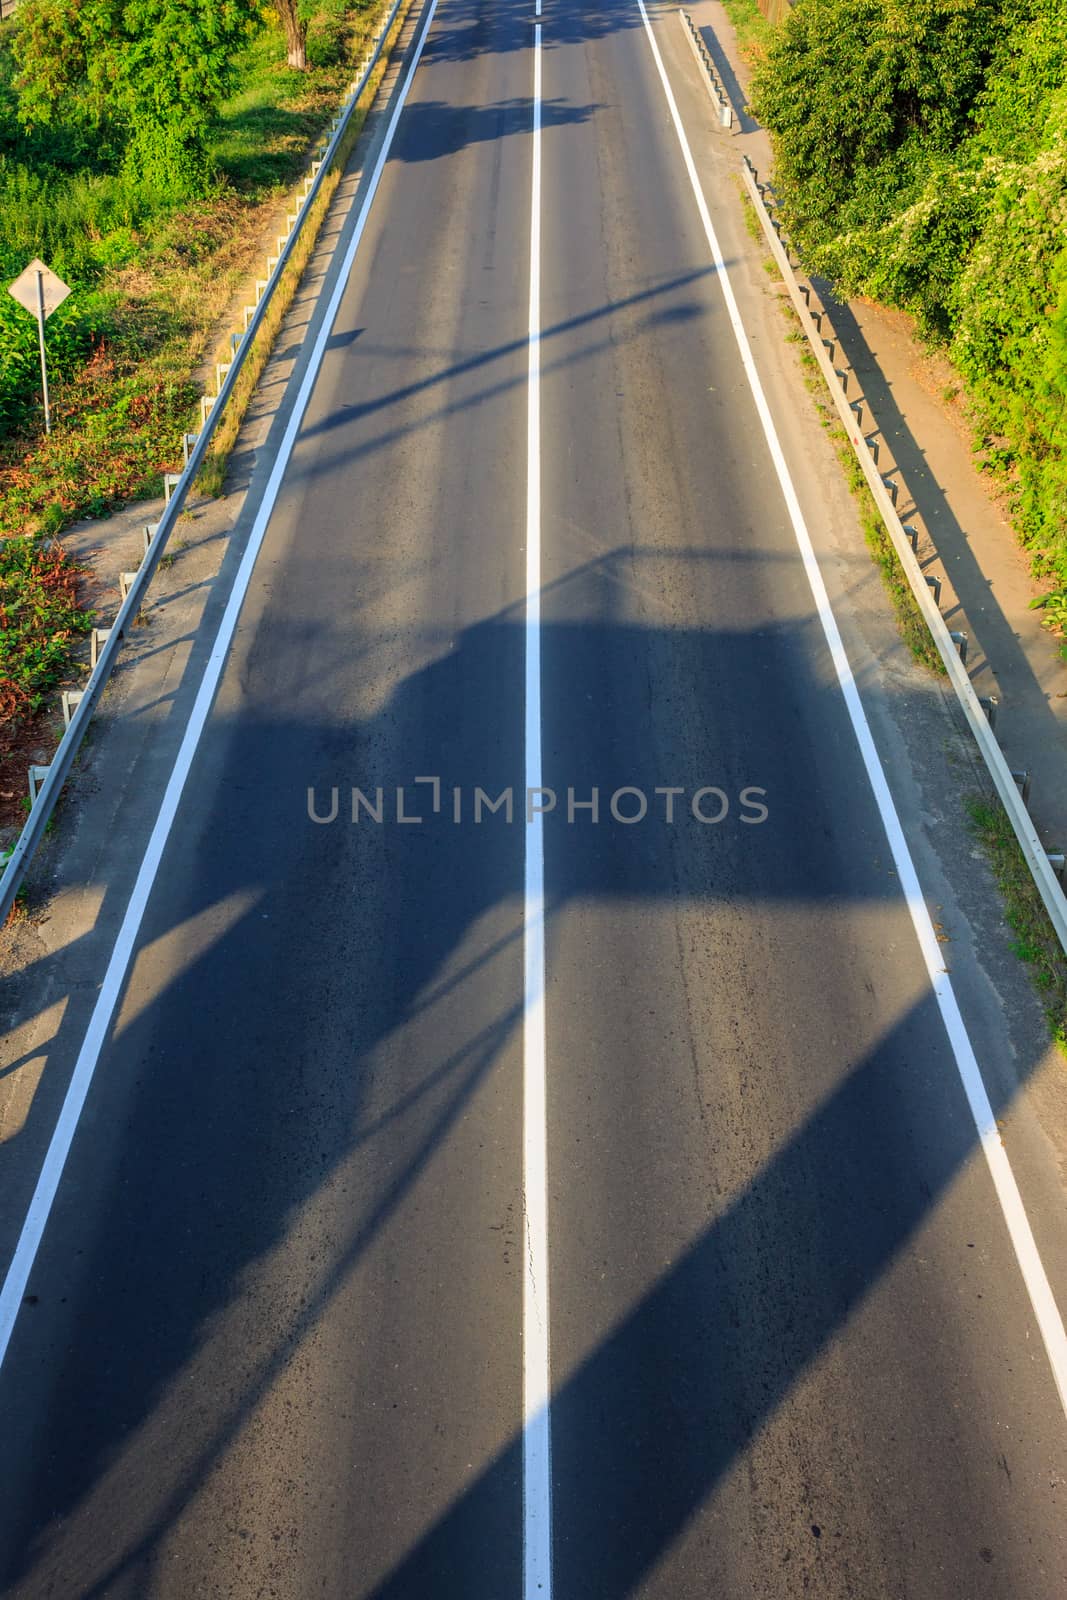 early shadow on an empty road by Pellinni